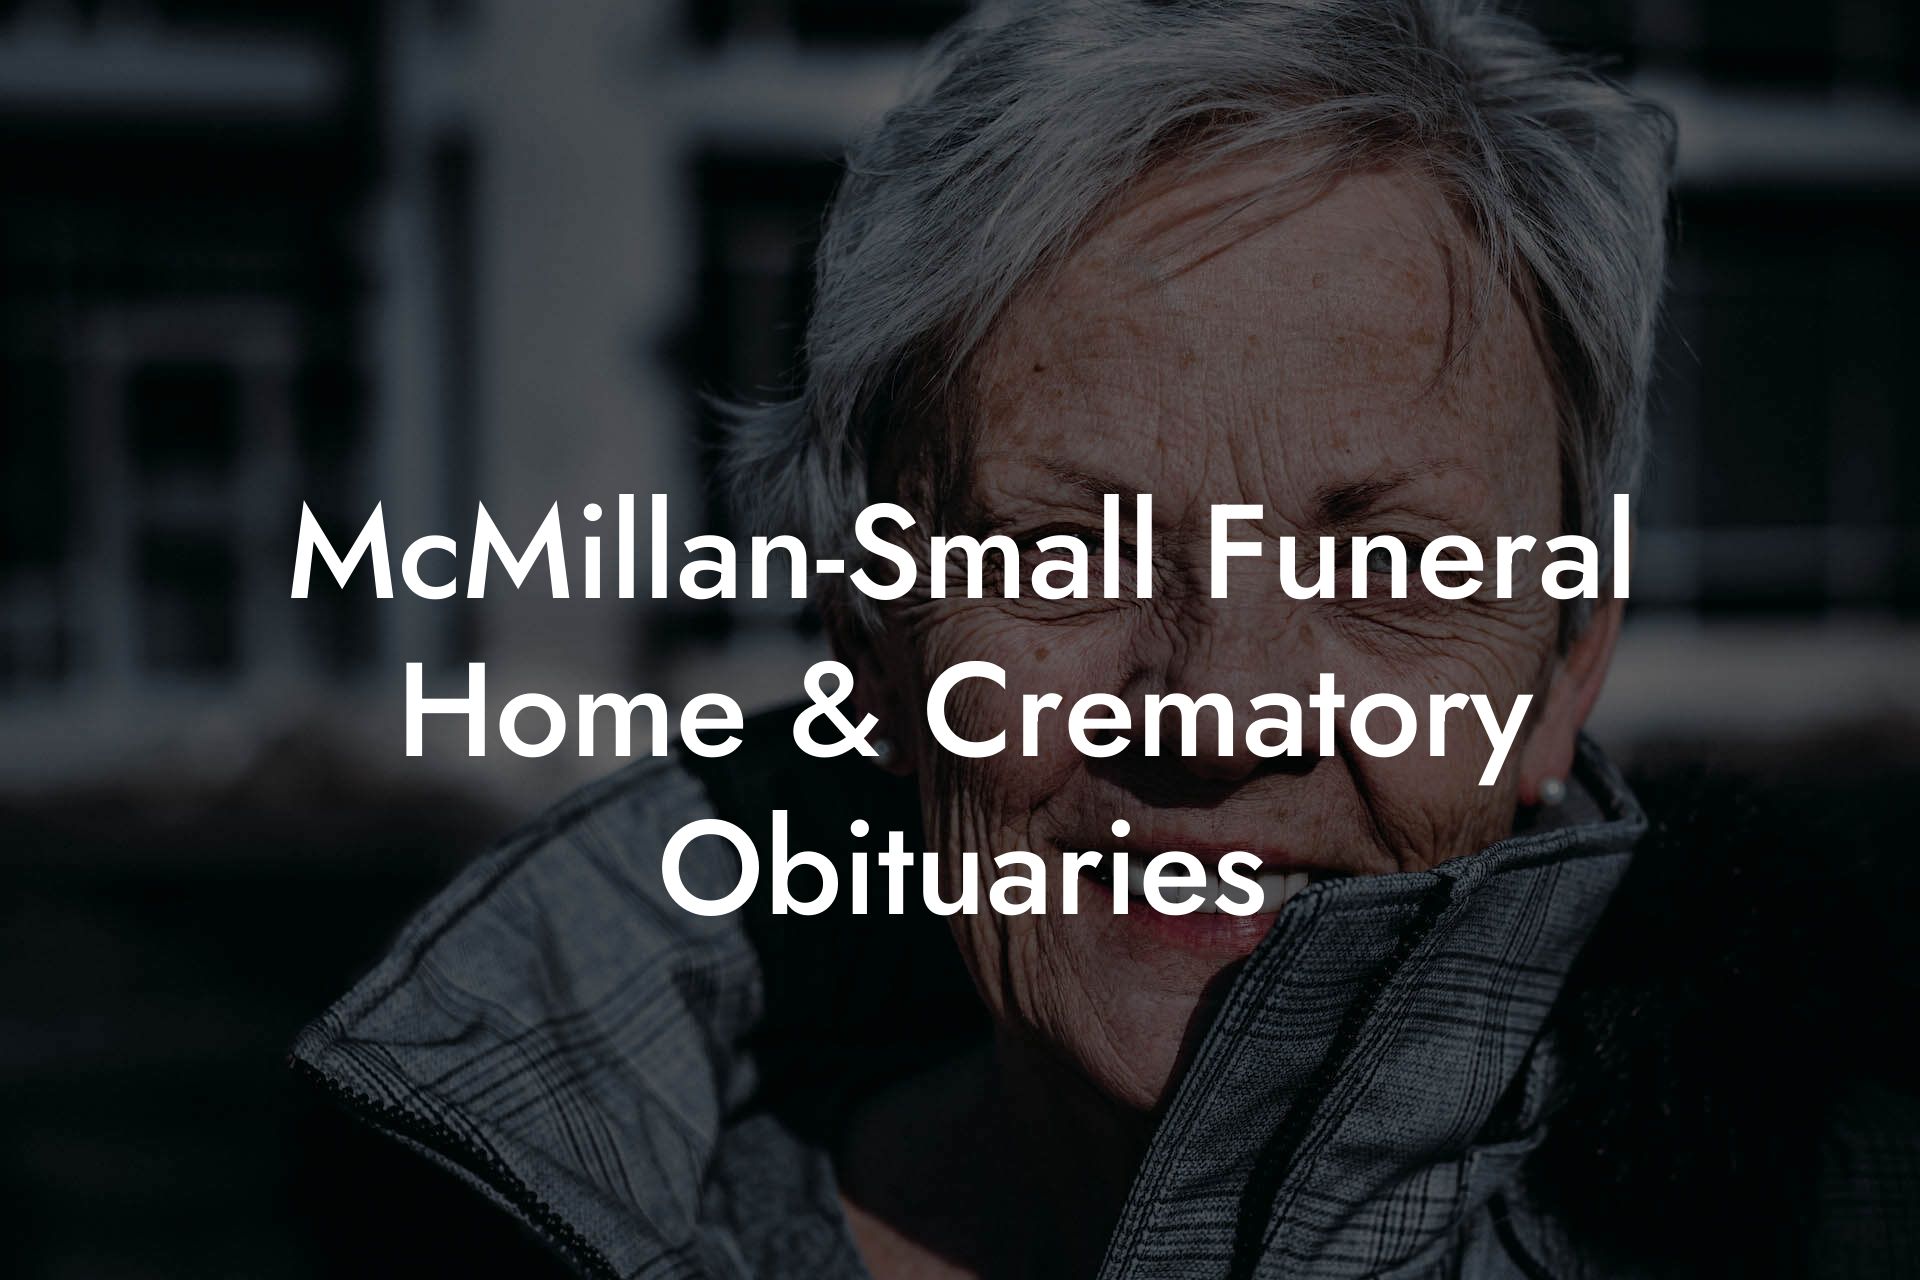 McMillan-Small Funeral Home & Crematory Obituaries